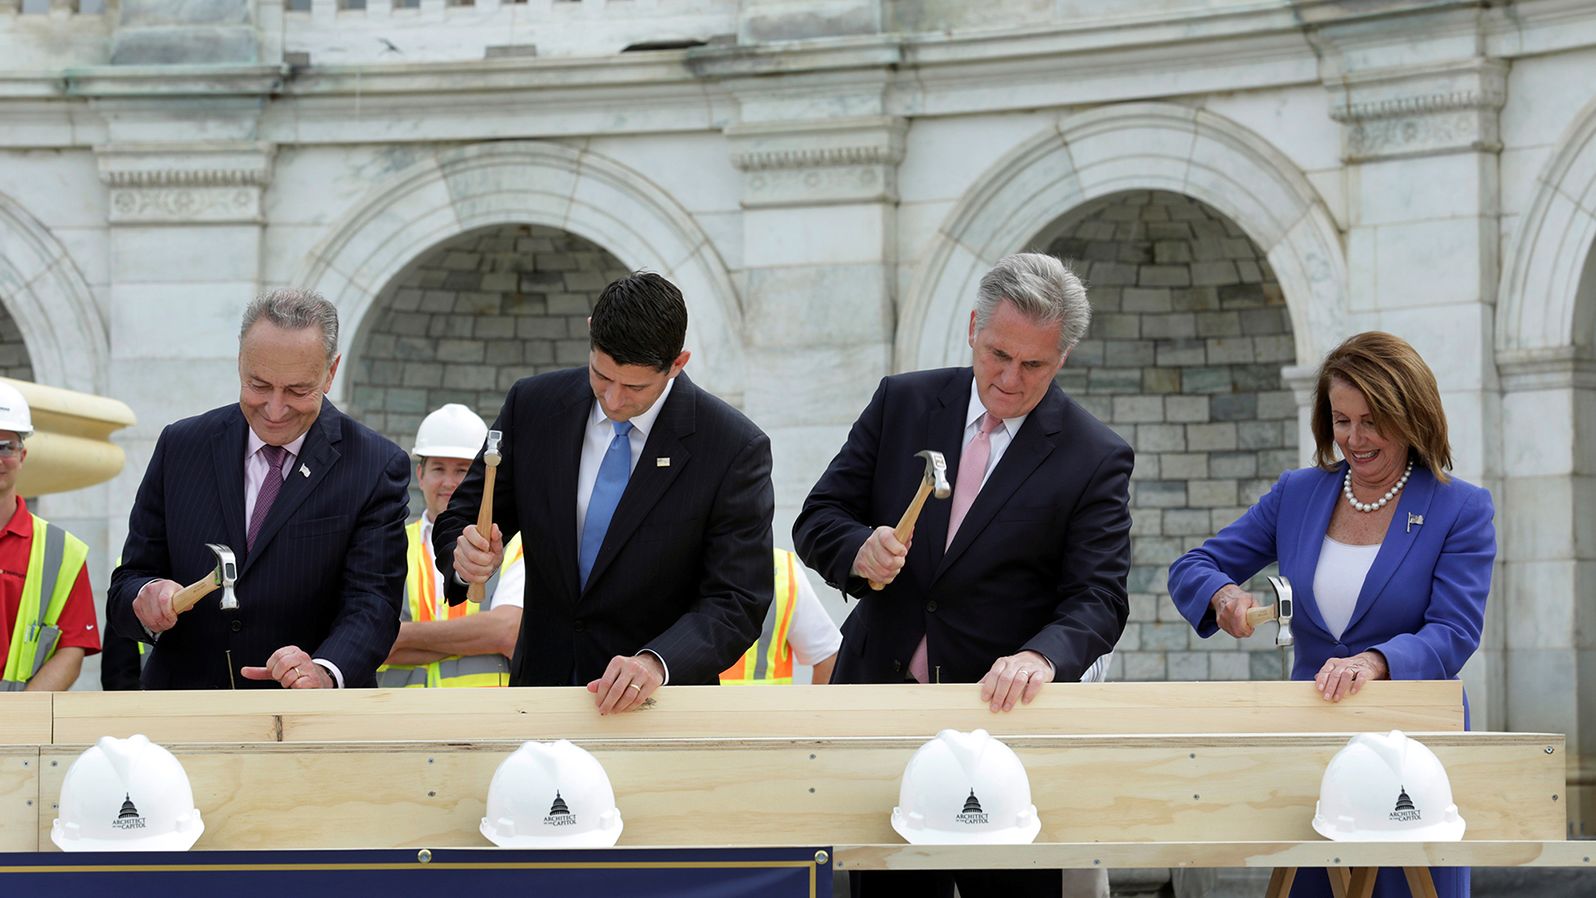 From left, US Sen. Chuck Schumer, House Speaker Paul Ryan, House Majority Leader Kevin McCarthy and House Minority Leader Nancy Pelosi participate in a "first nail ceremony" kicking off the construction of an inauguration platform at the Capitol in 2016.